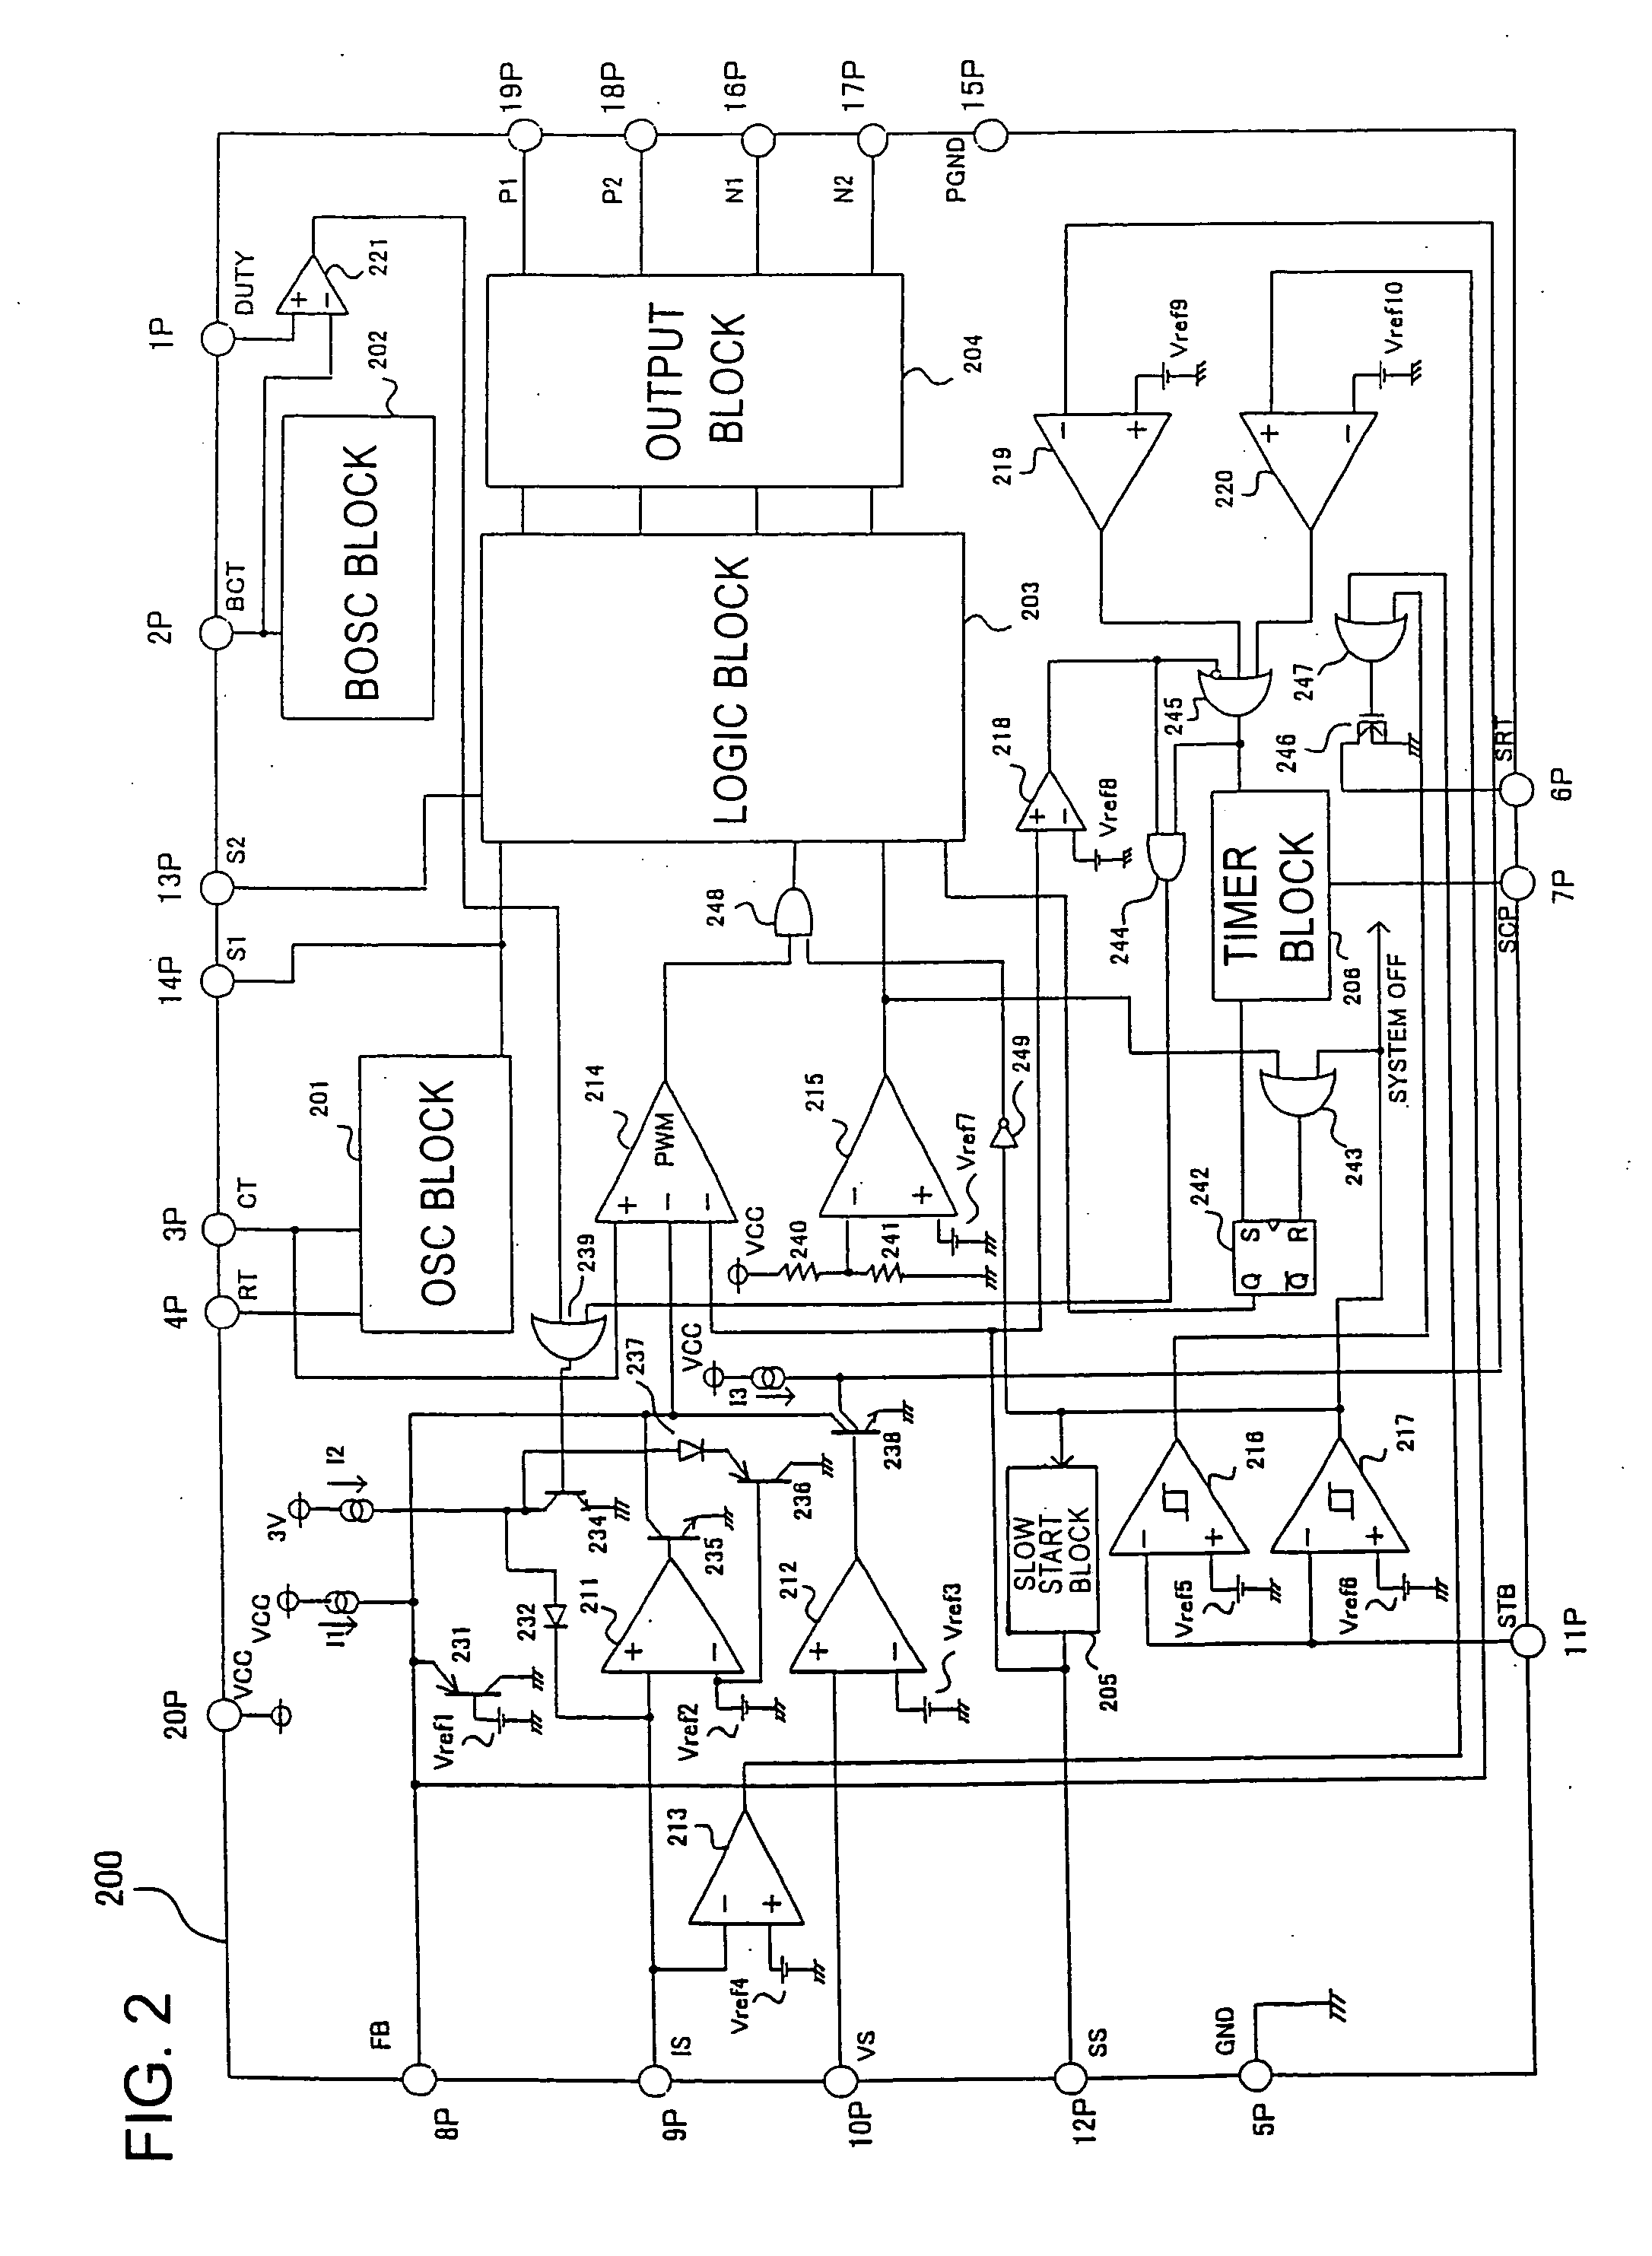 Dc/ac converter and controller ic